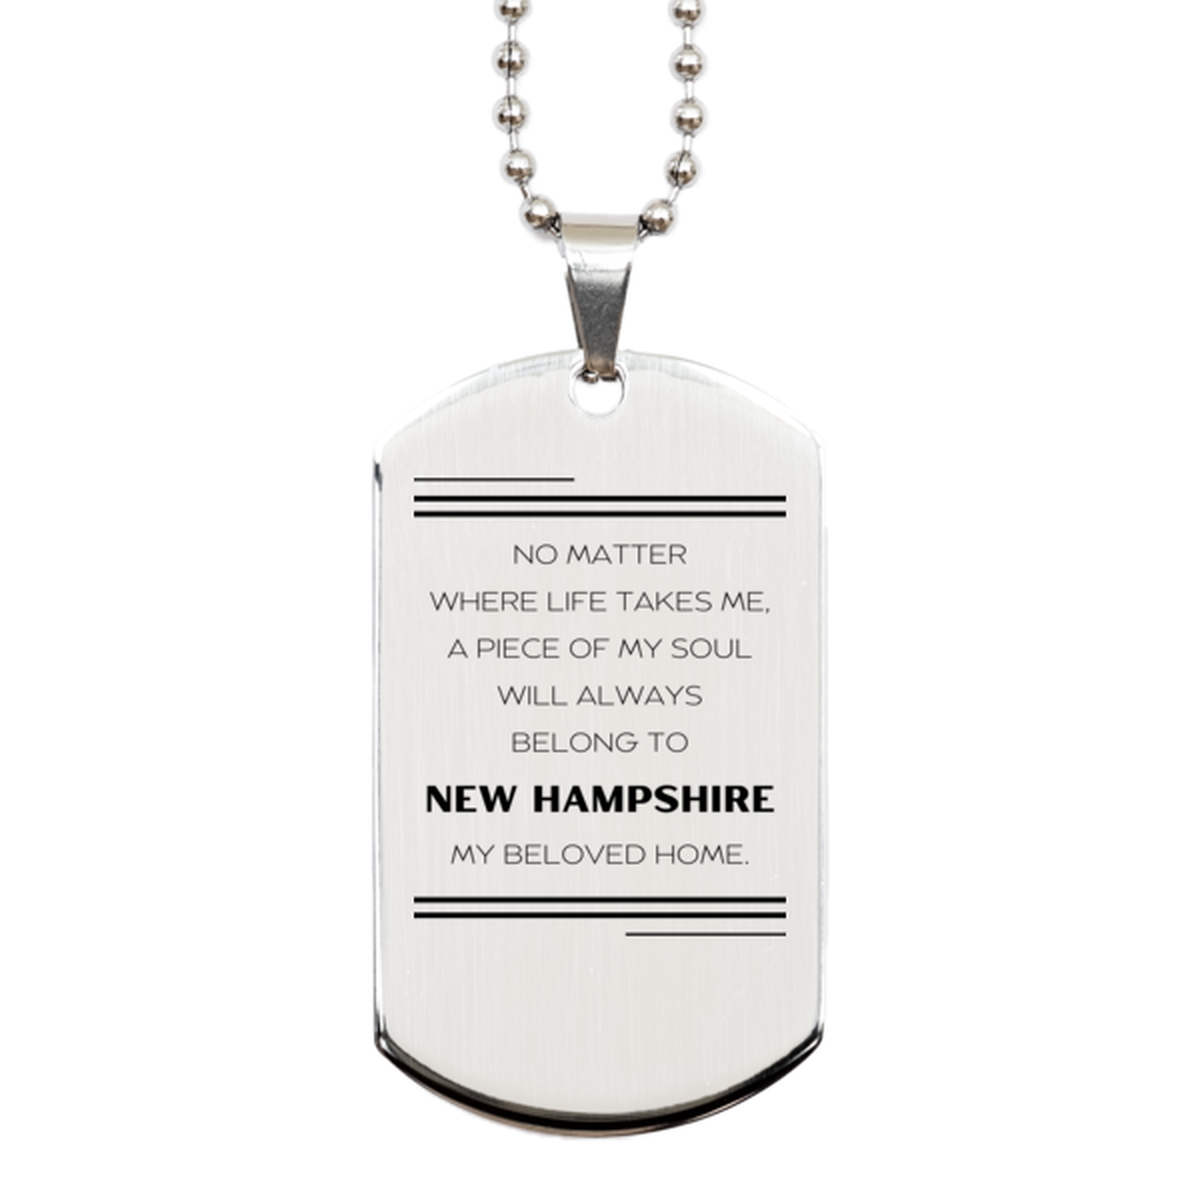 Love New Hampshire State Gifts, My soul will always belong to New Hampshire, Proud Silver Dog Tag, Birthday Unique Gifts For New Hampshire Men, Women, Friends